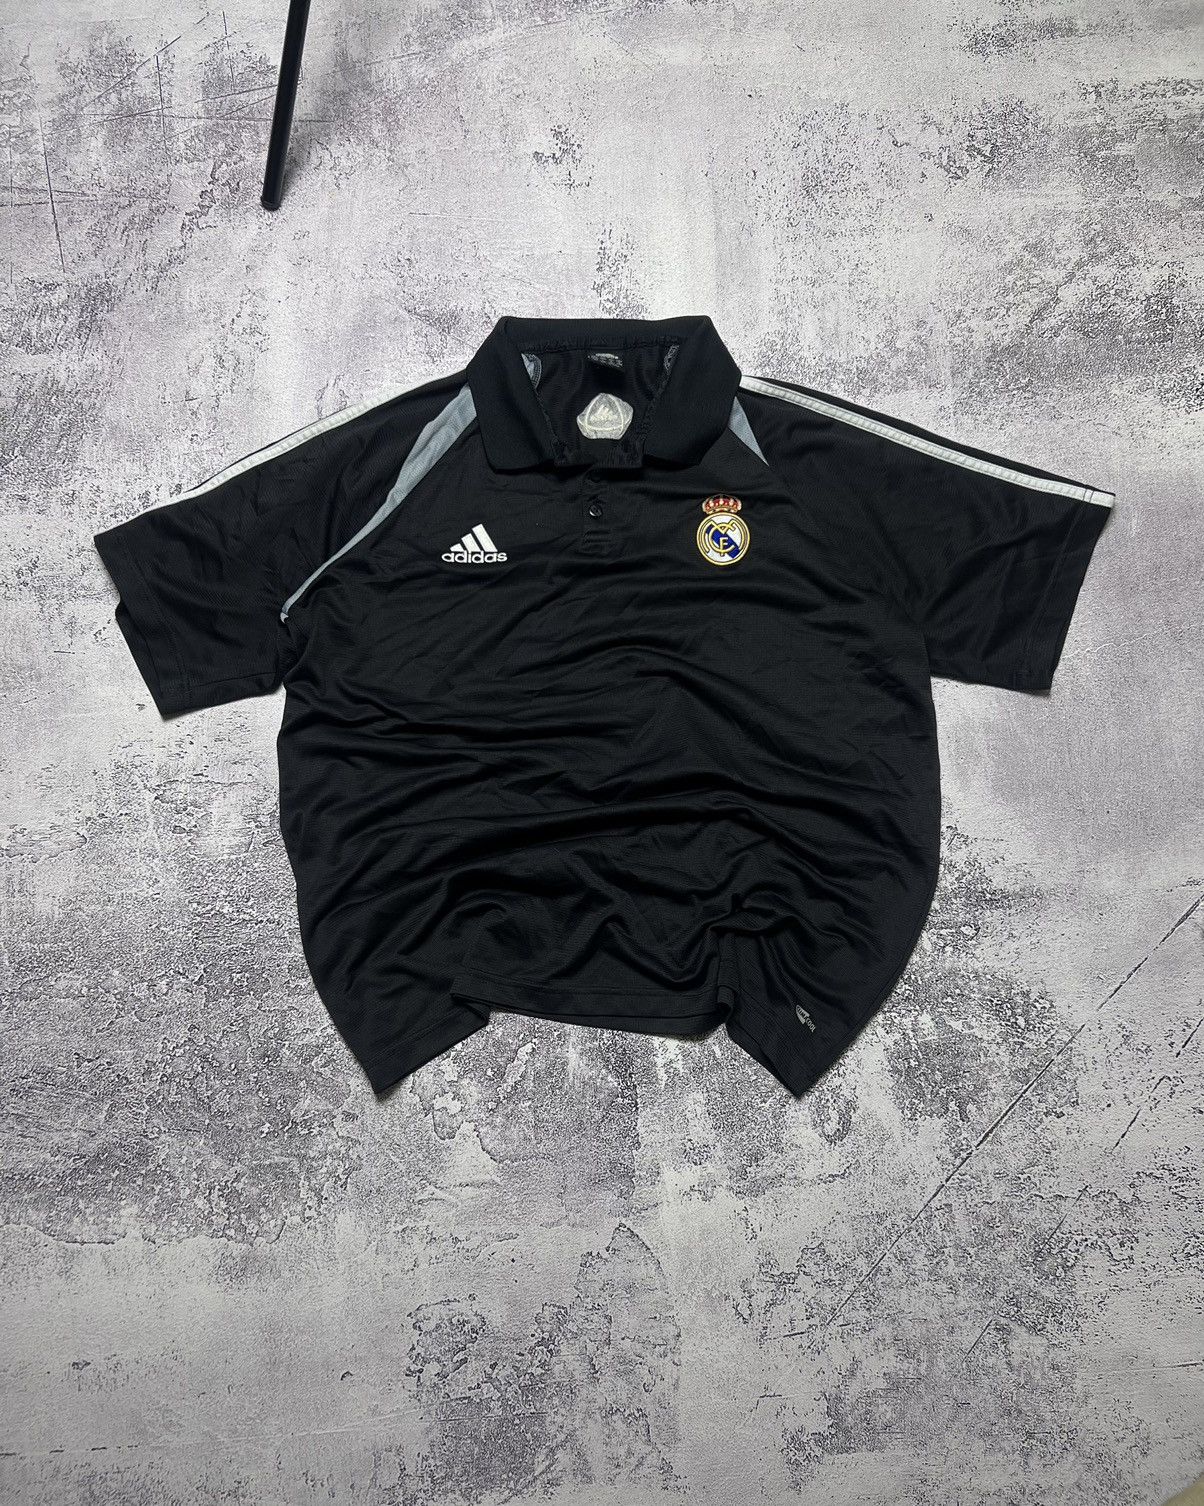 Pre-owned Adidas X Soccer Jersey Real Madrid 2004 2005 Home Adidas Soccer Jersey Vintage In Black